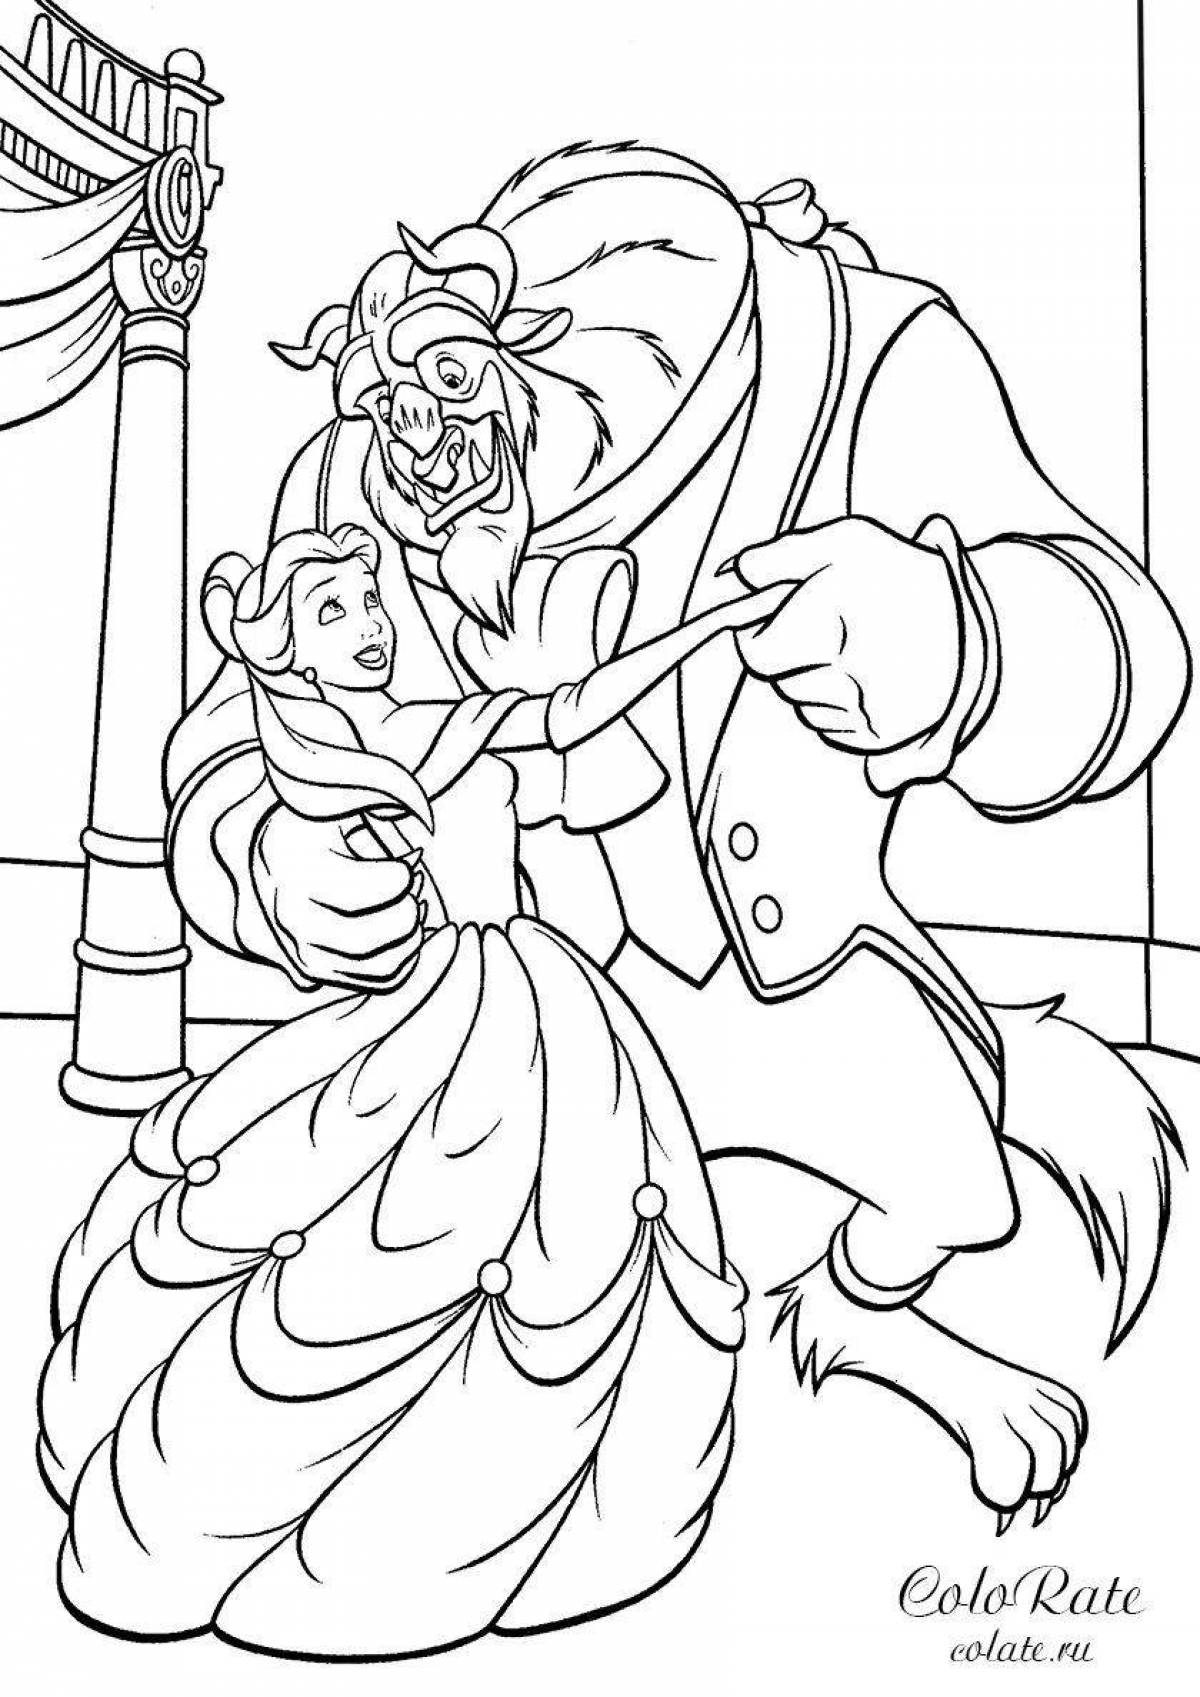 Belle and the monster colorful coloring page